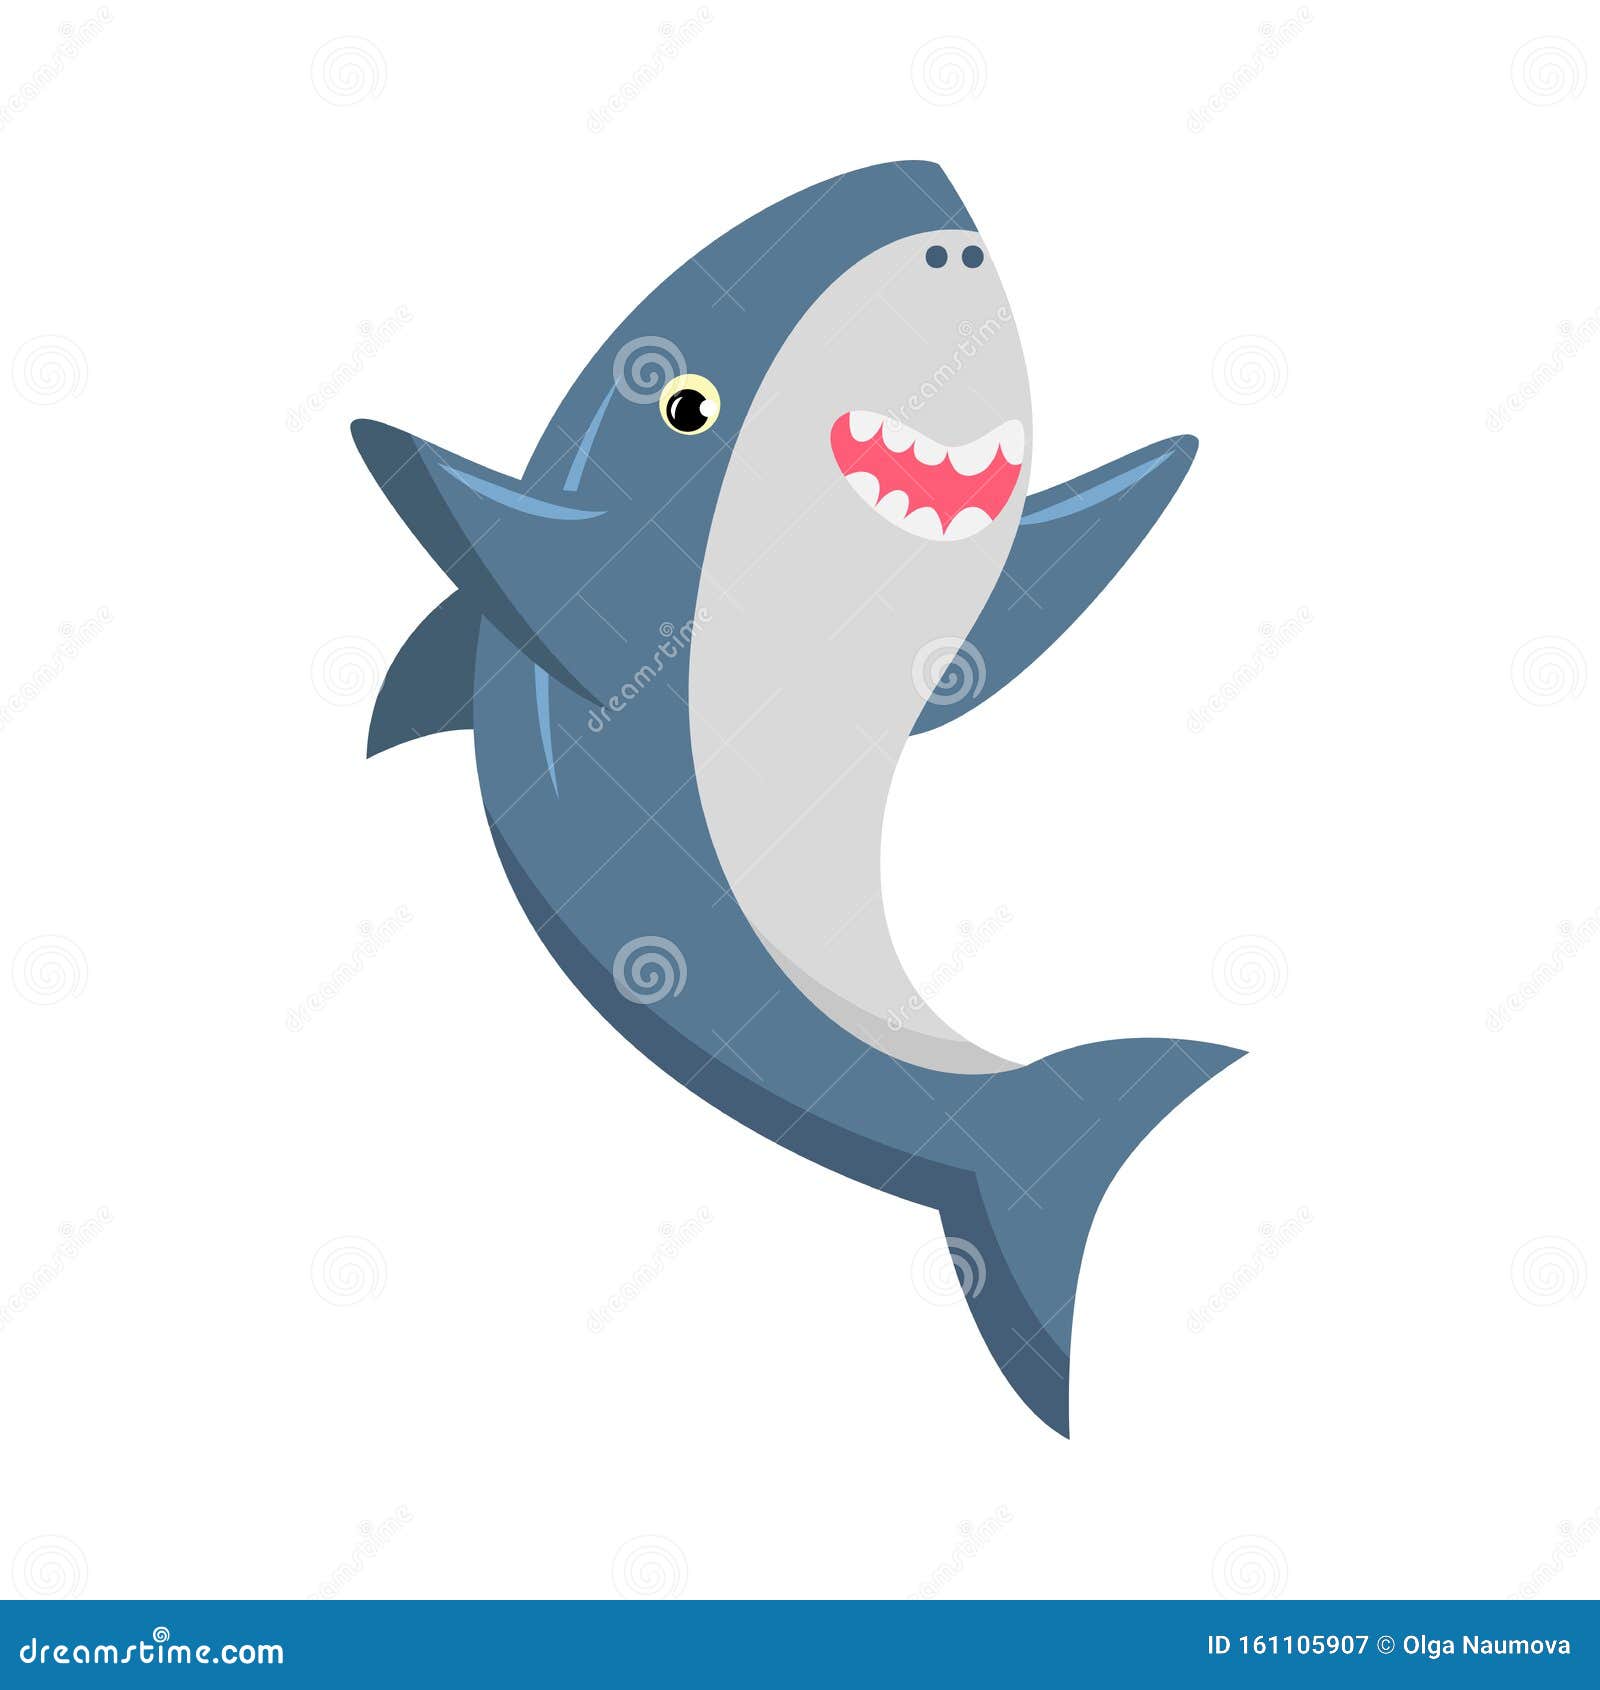 Download Cute Smiling Blue Shark With Sharp Teeth. Vector ...